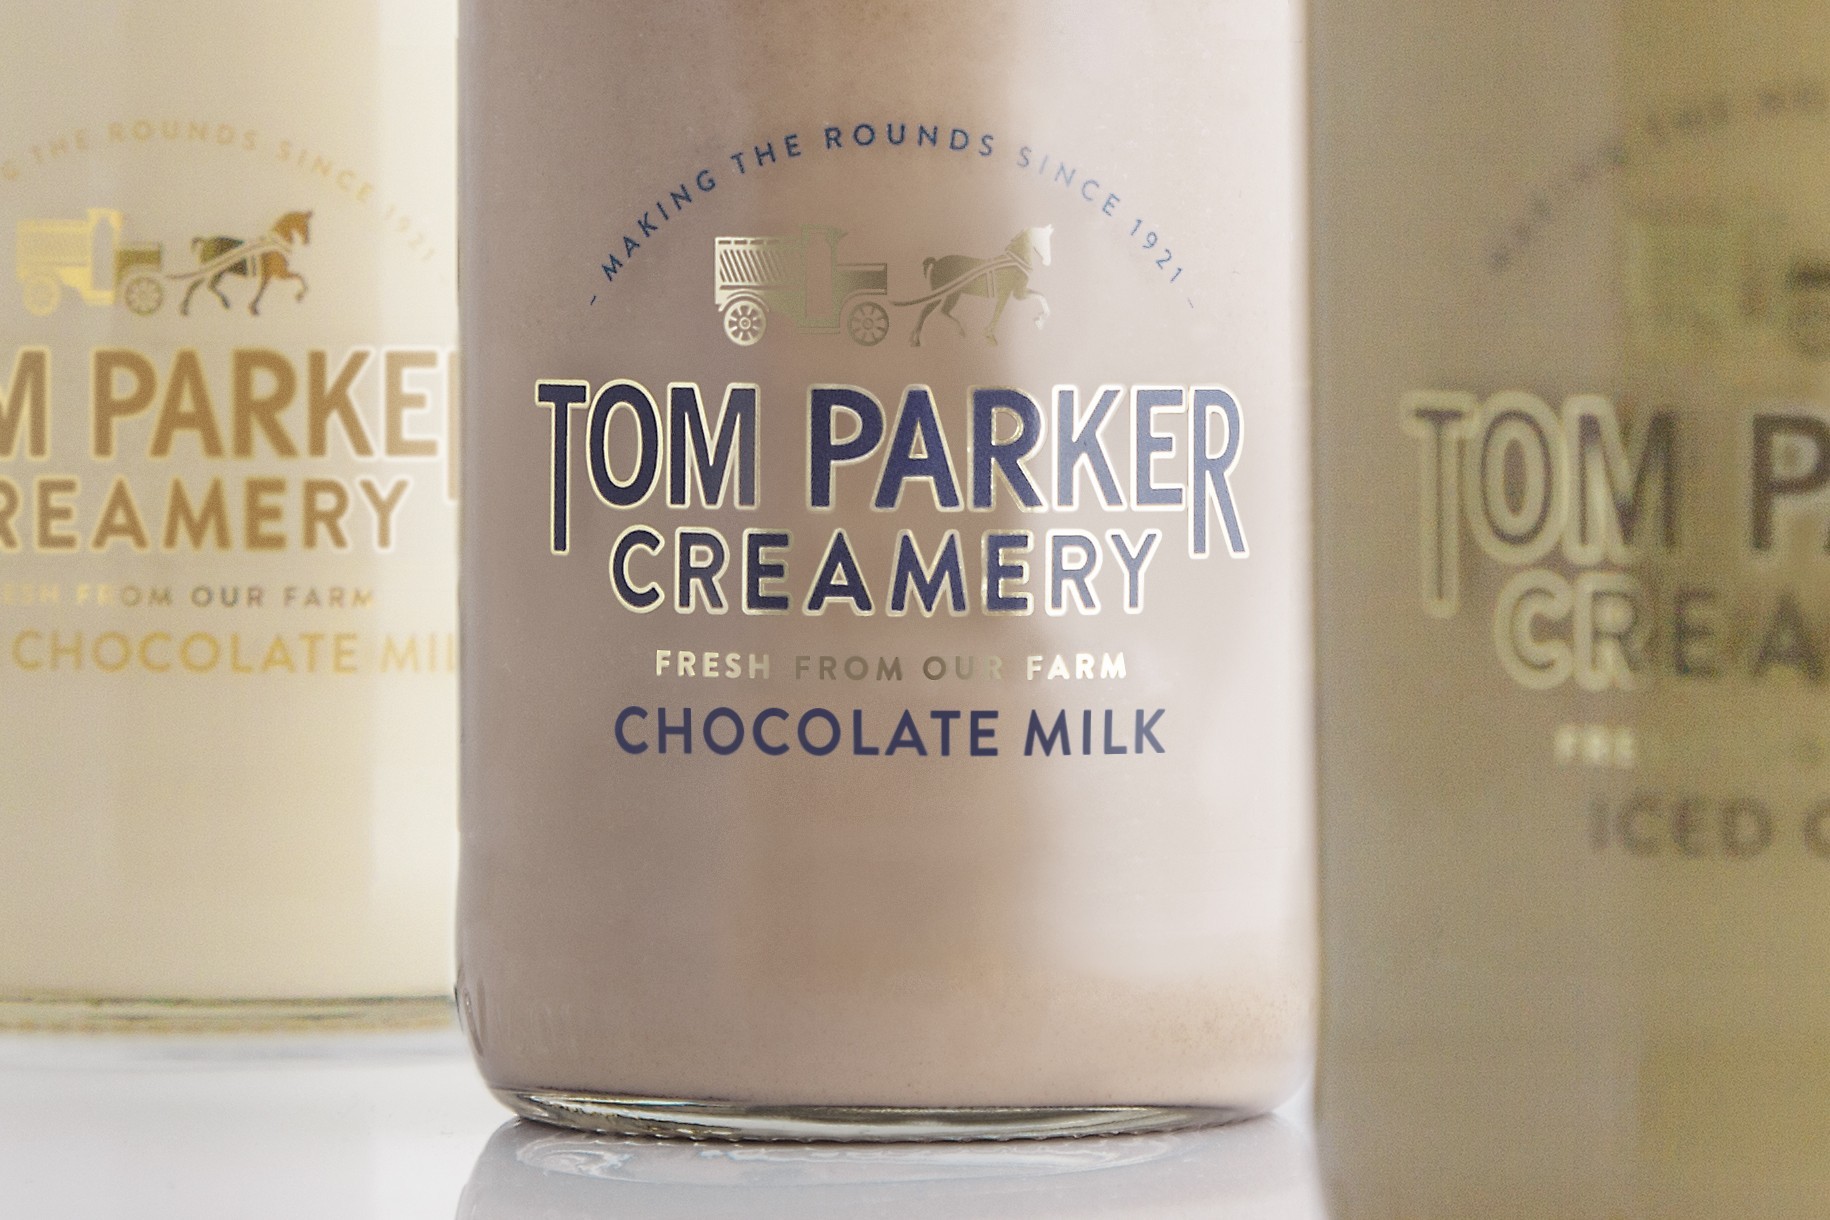 High Quality Dairy Products Designed with an Essence of British Nostalgia